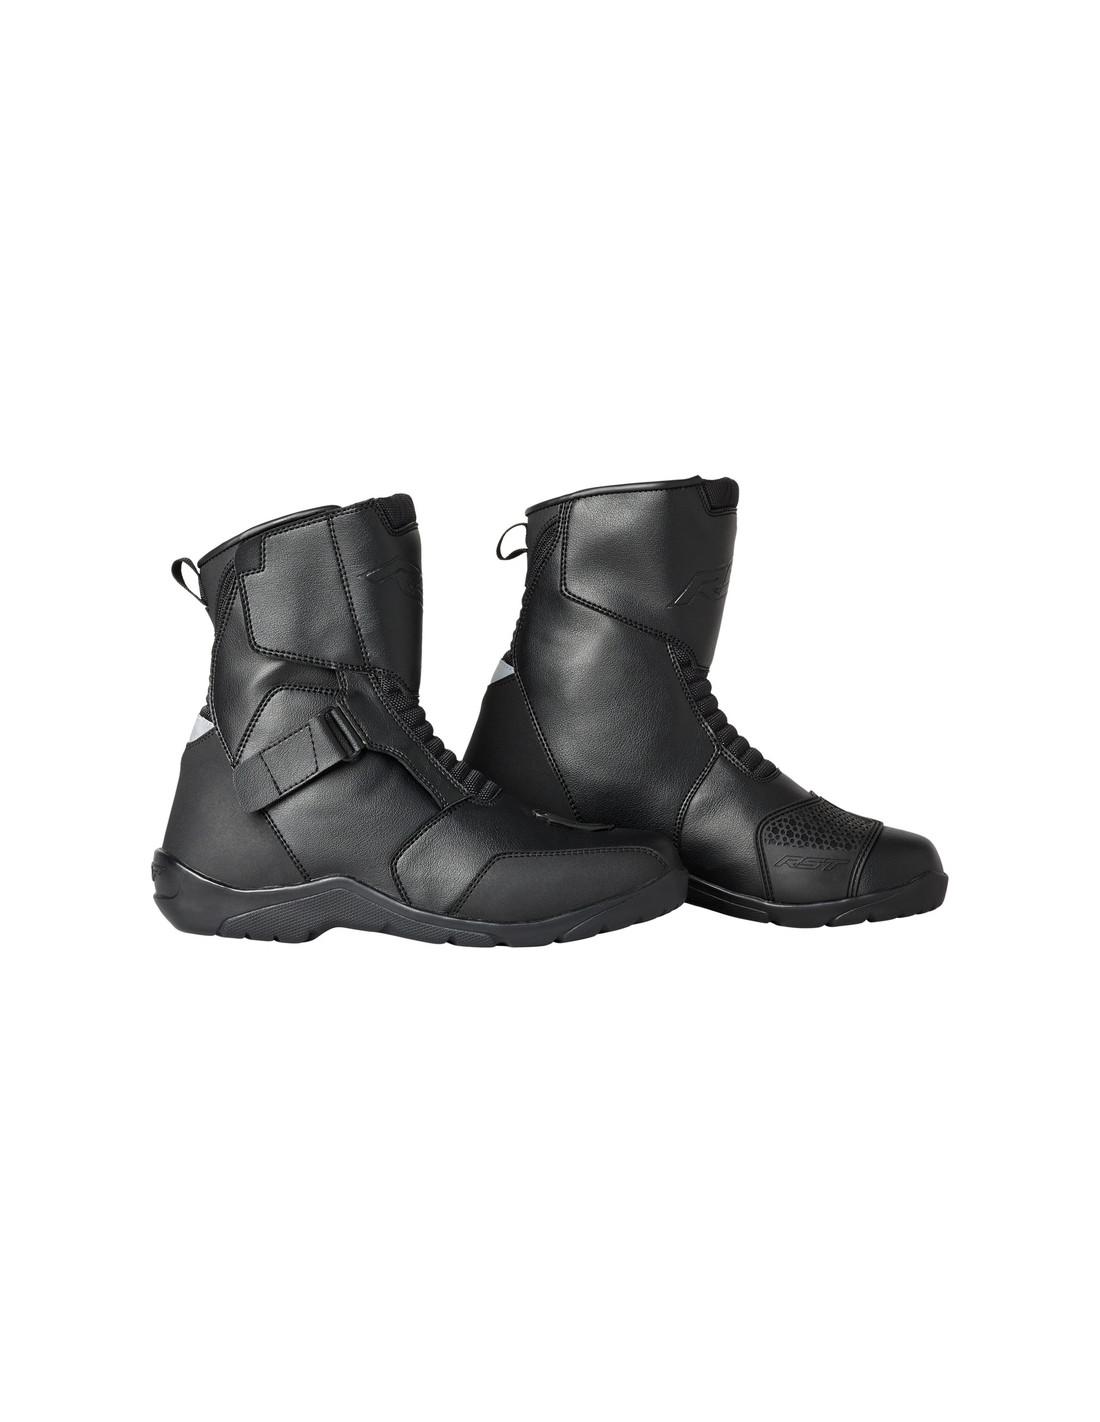 Bottes route Bottes RST Axiom mid waterproof CE homme - Noir